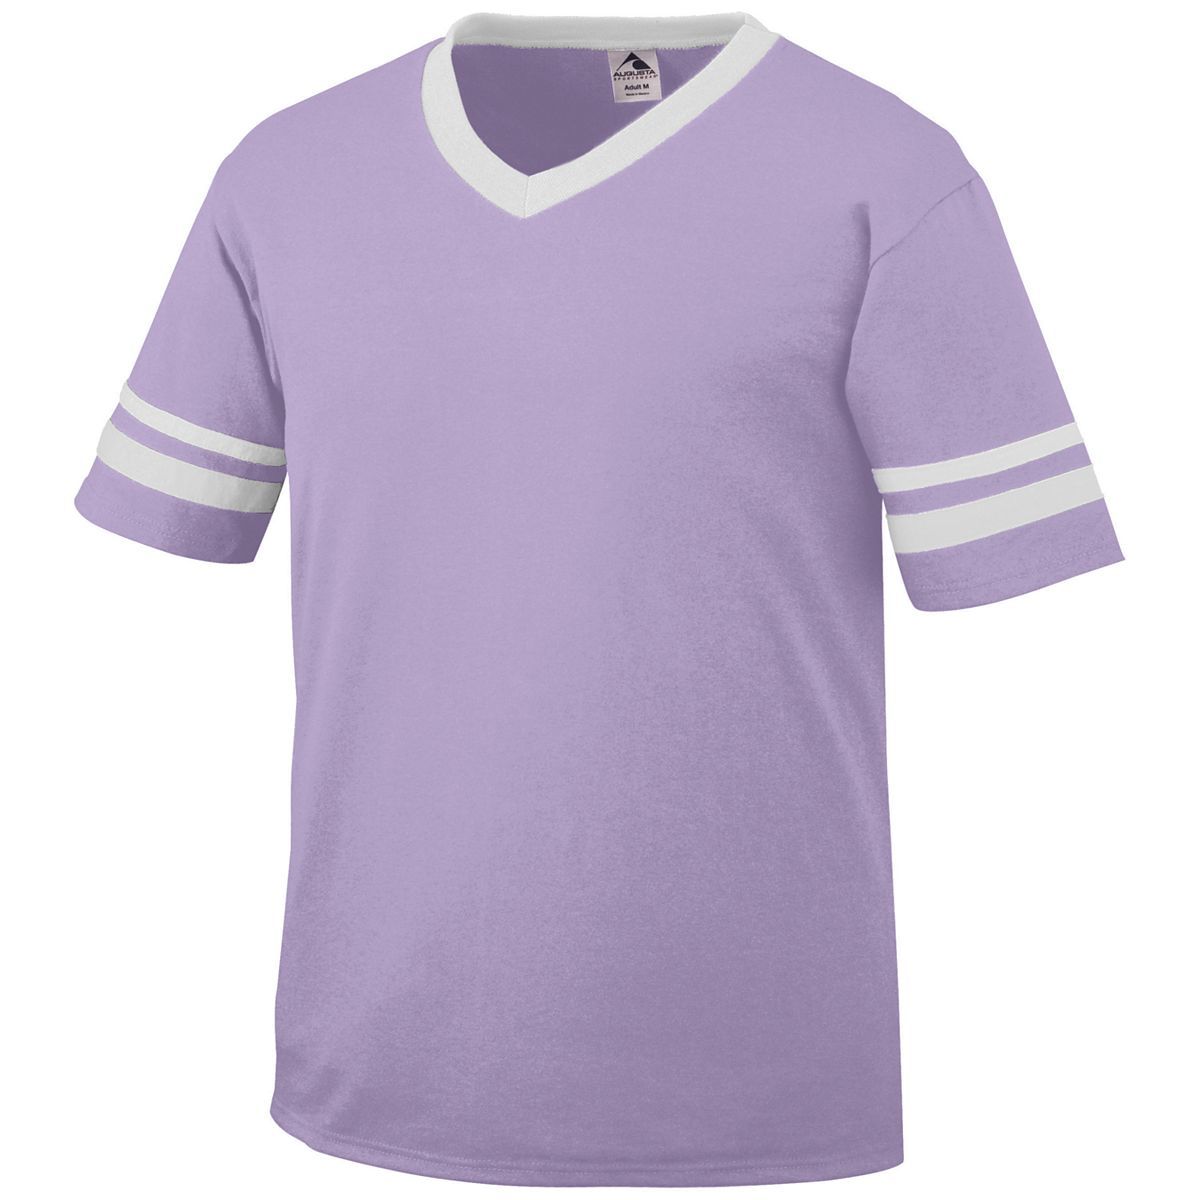 Augusta Sportswear Youth Sleeve Stripe Jersey in Light Lavender/White  -Part of the Youth, Youth-Jersey, Augusta-Products, Shirts product lines at KanaleyCreations.com